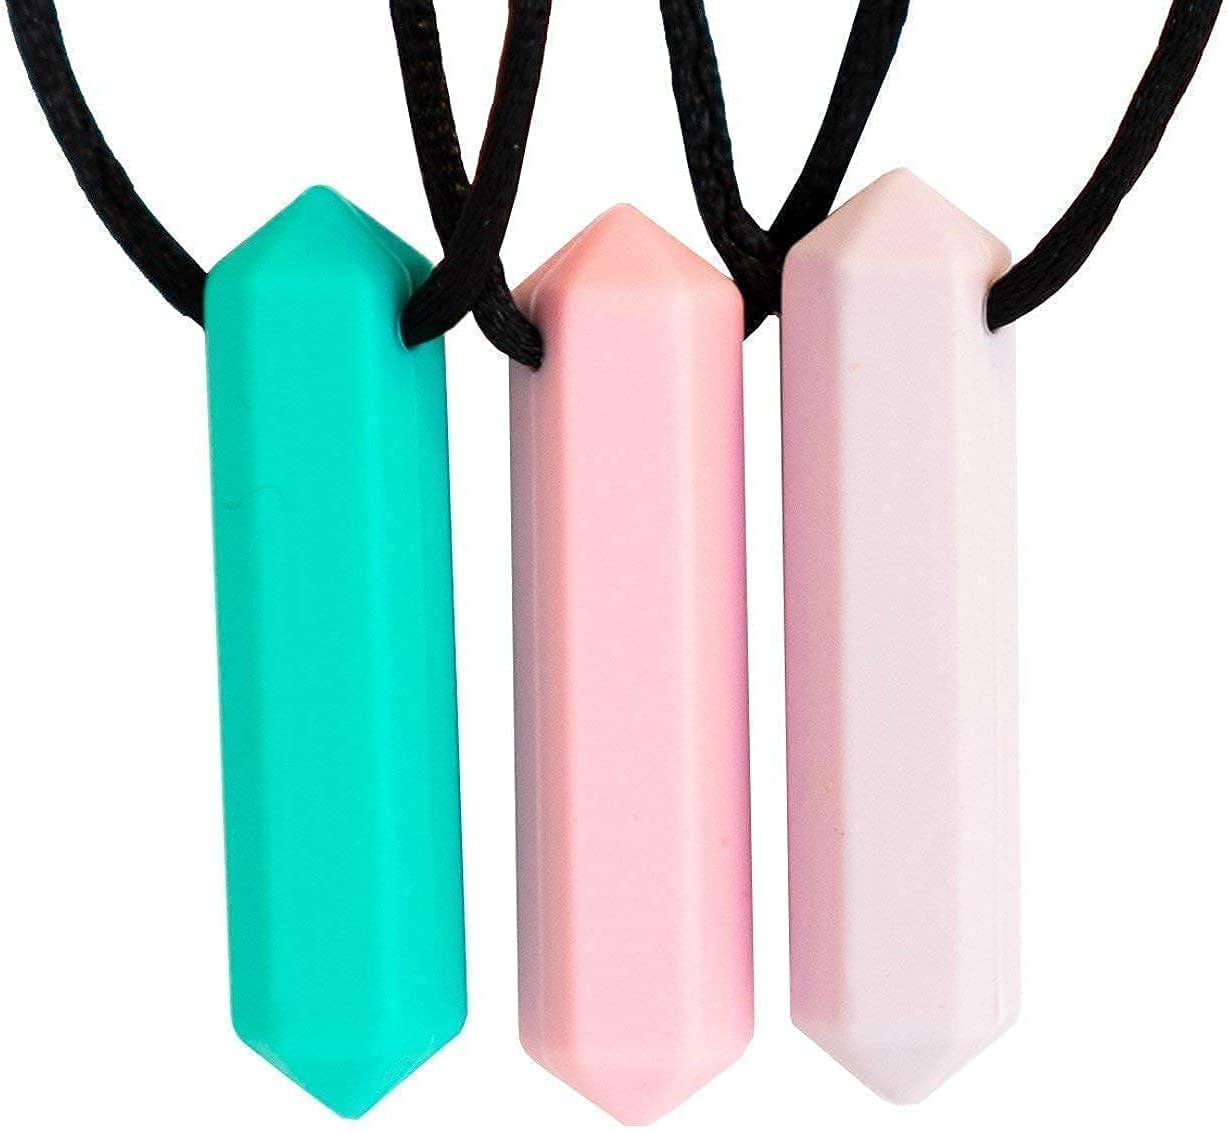 Kids Adults Chewable Necklace Autism ADHD Biting Chew Teething Toys | eBay